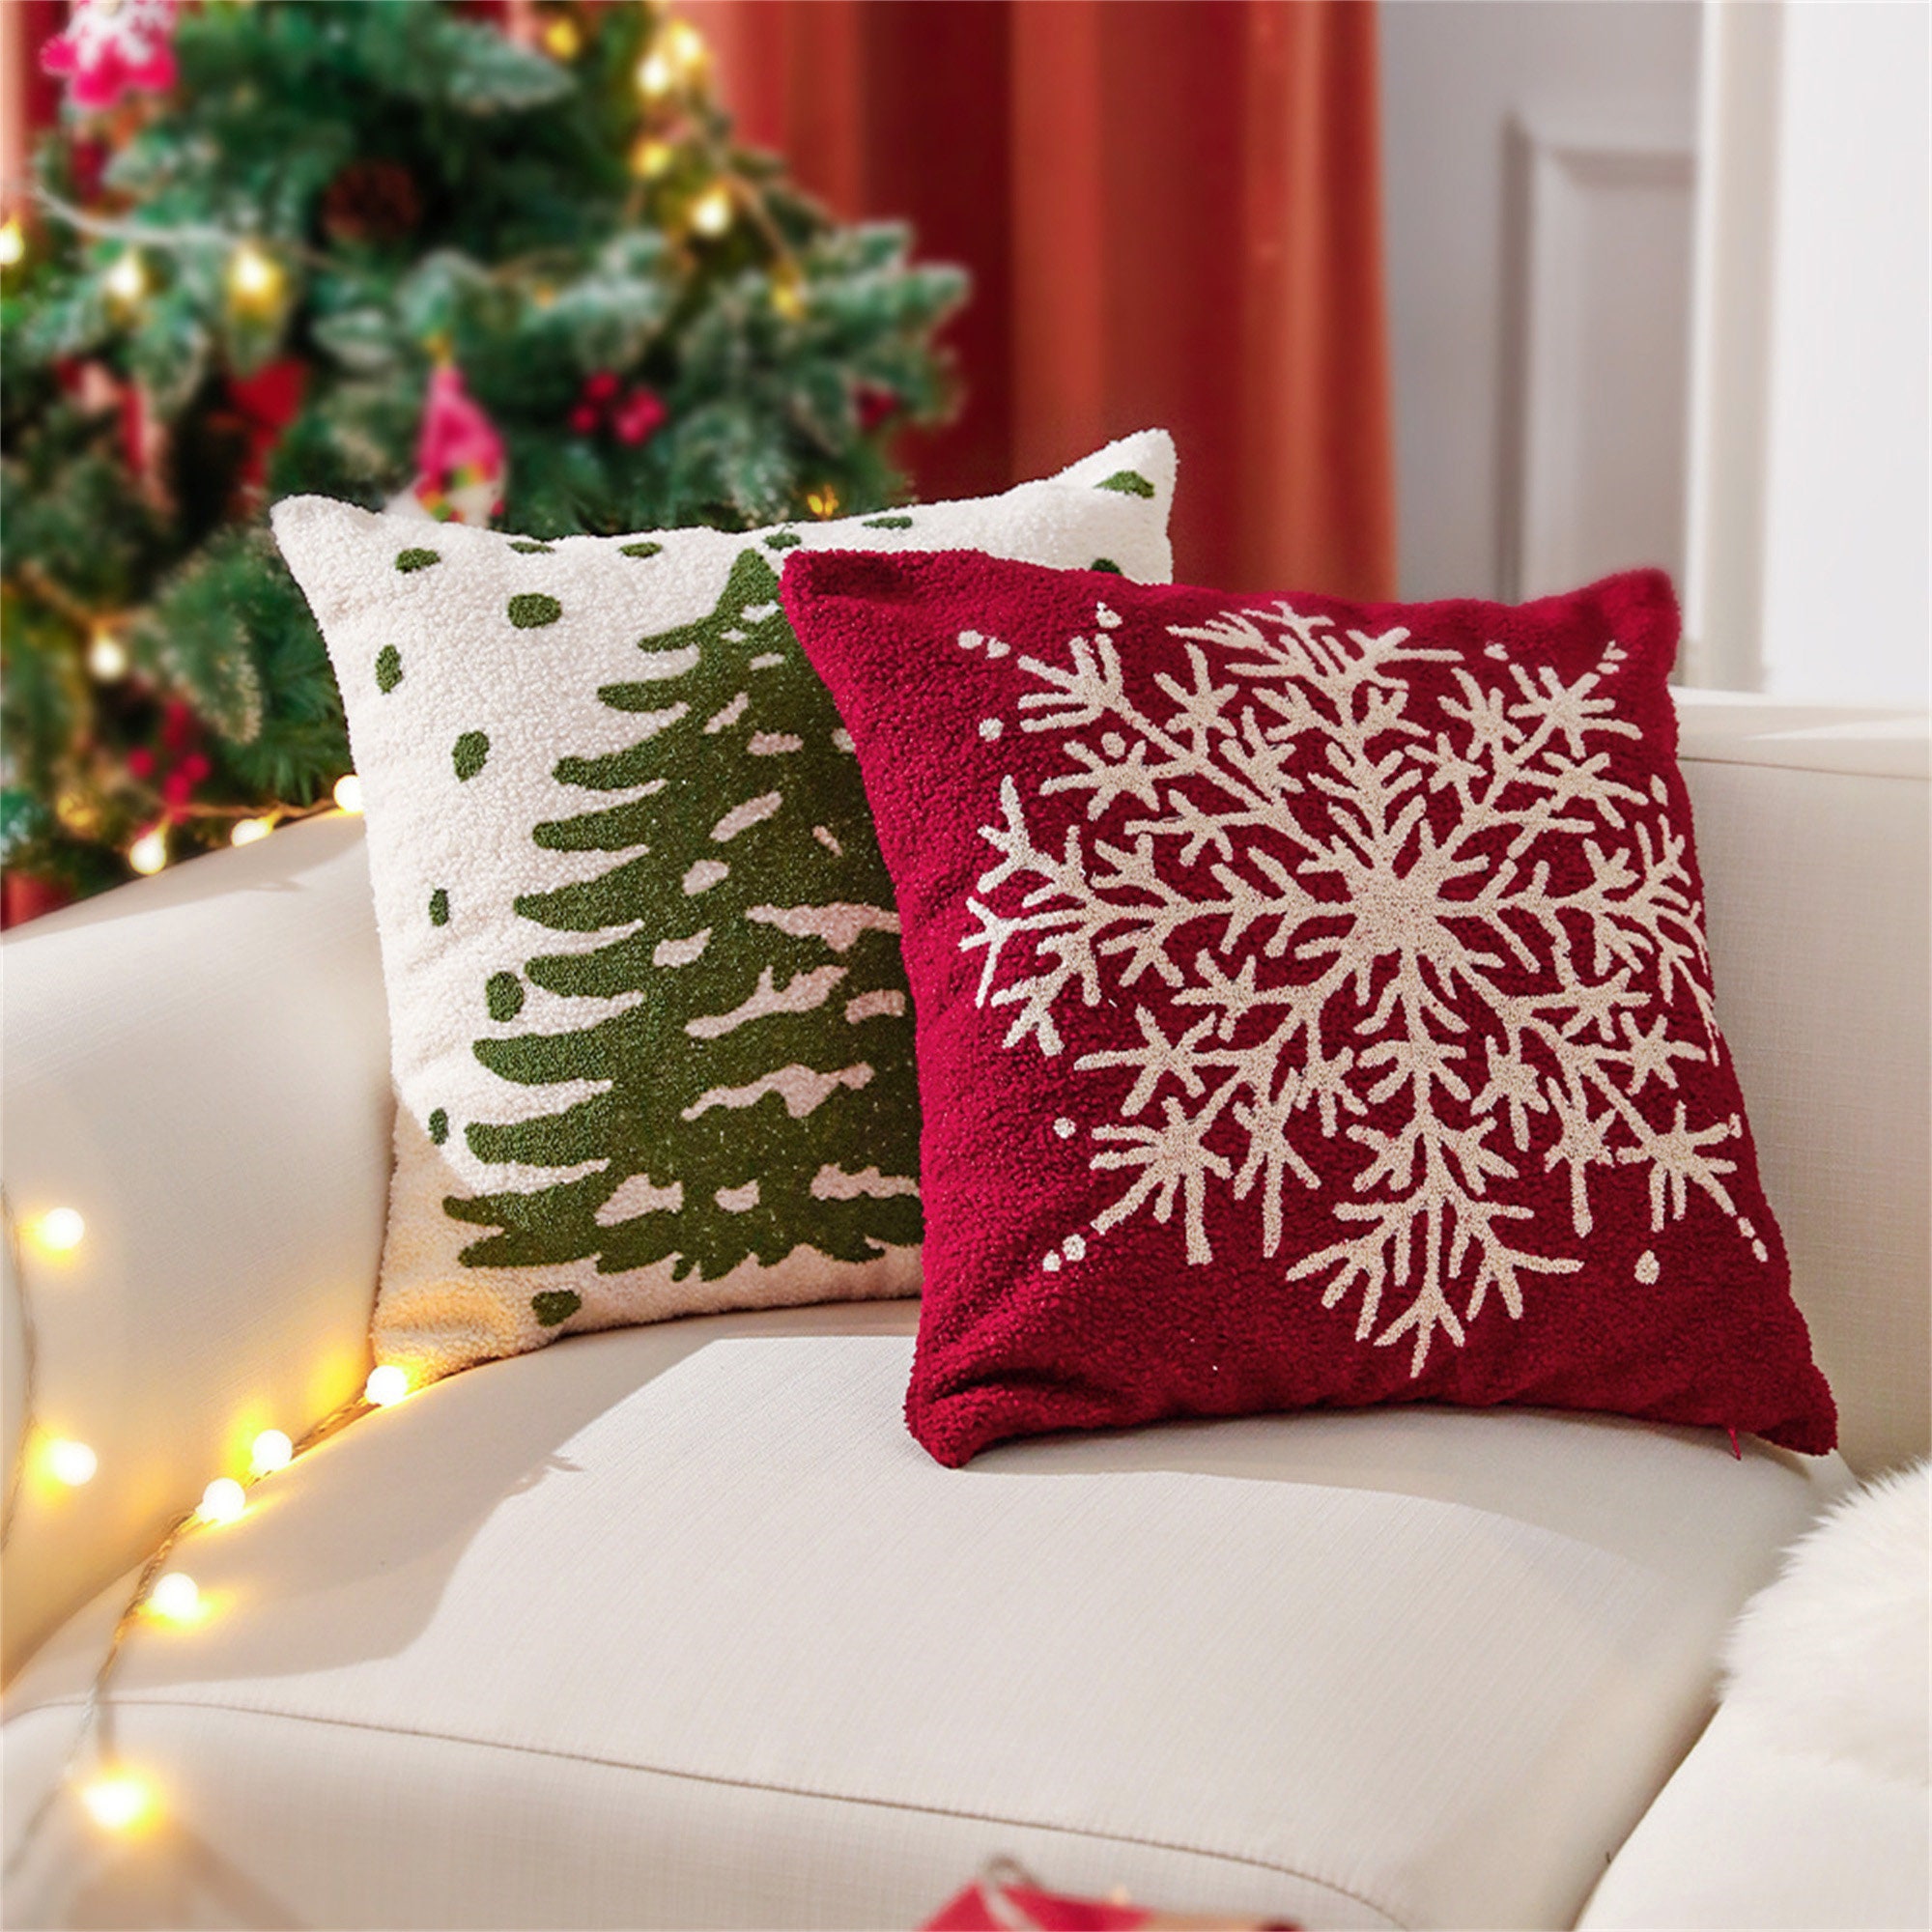 6 Packs Chirstmas Pillows Covers 18 X 18 Christmas Décor Pillow